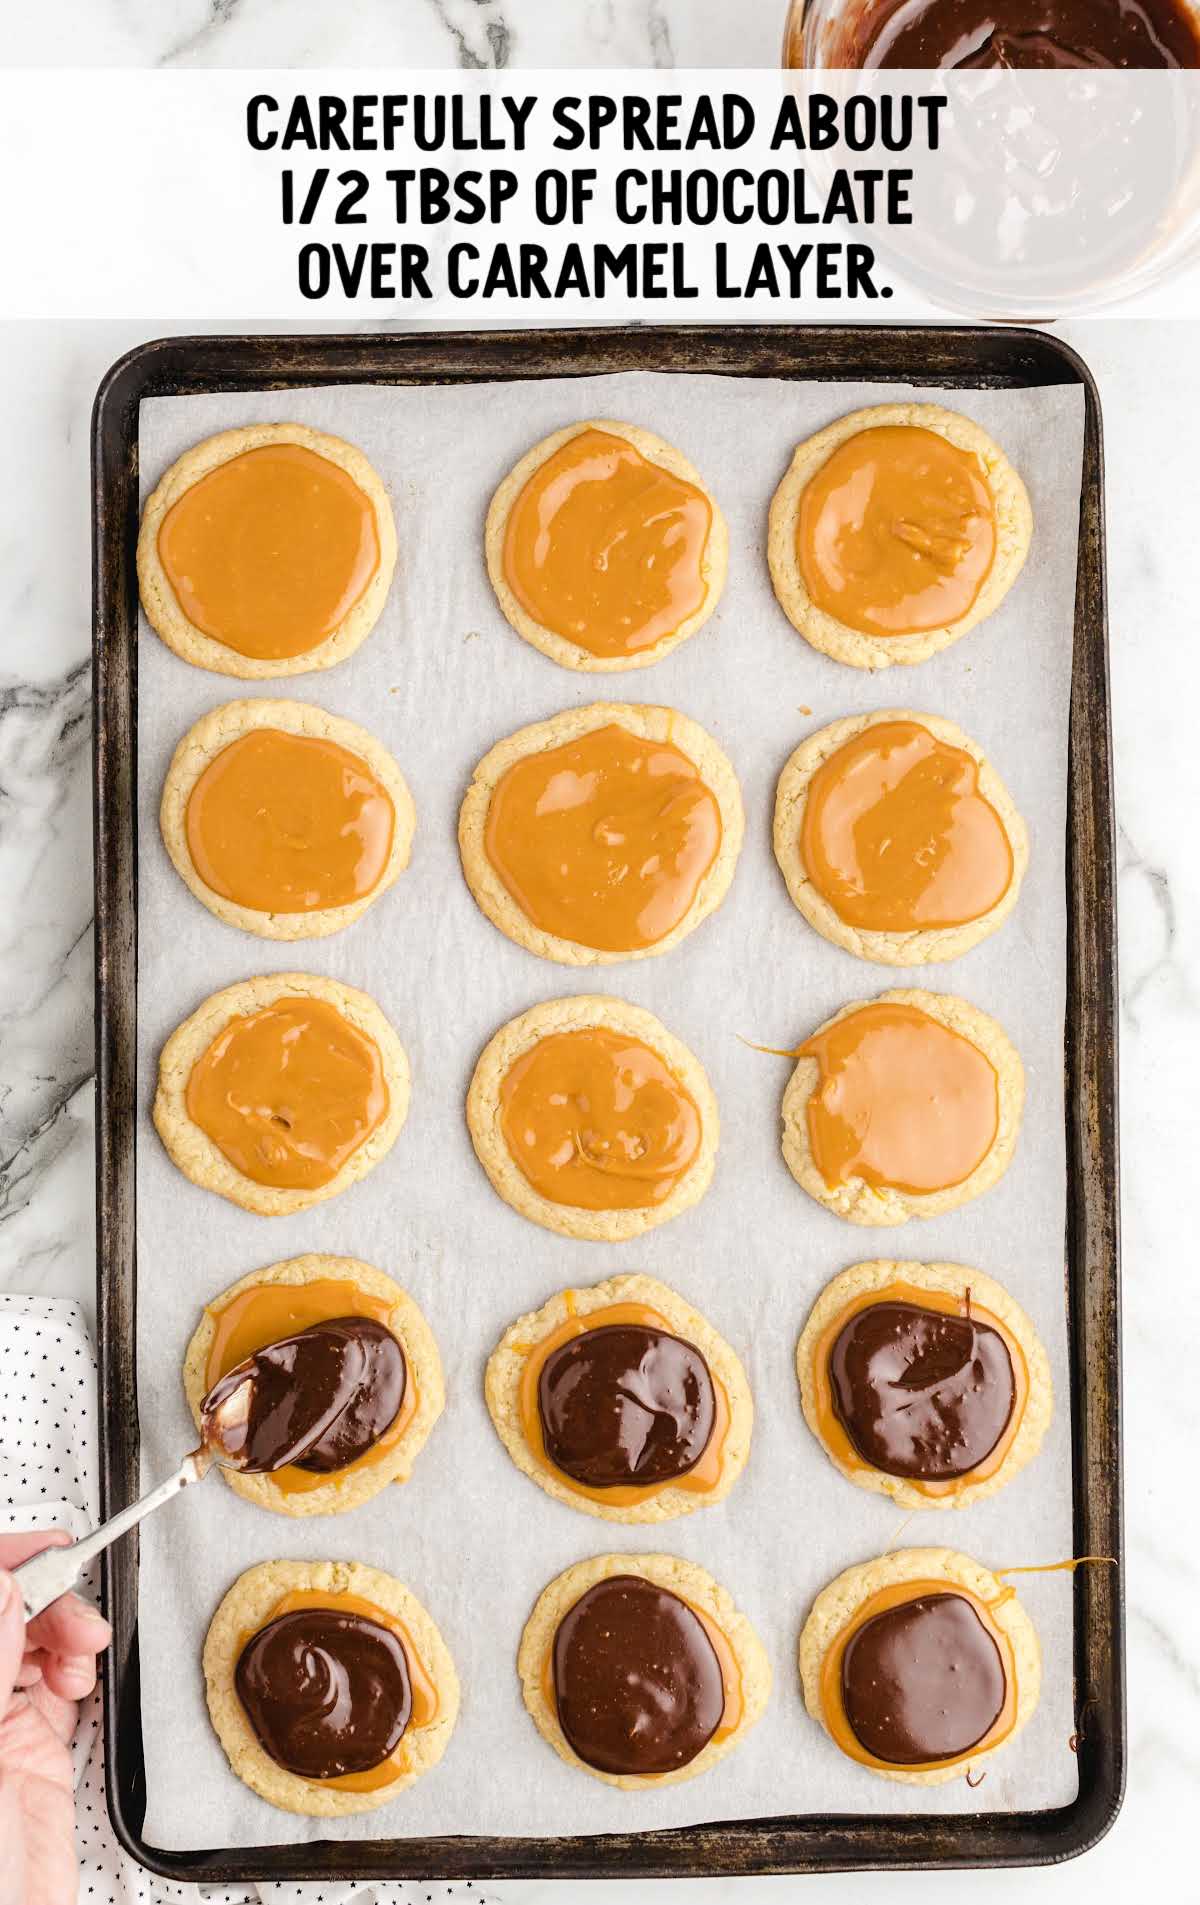 chocolate spread over the caramel layer on the cookies